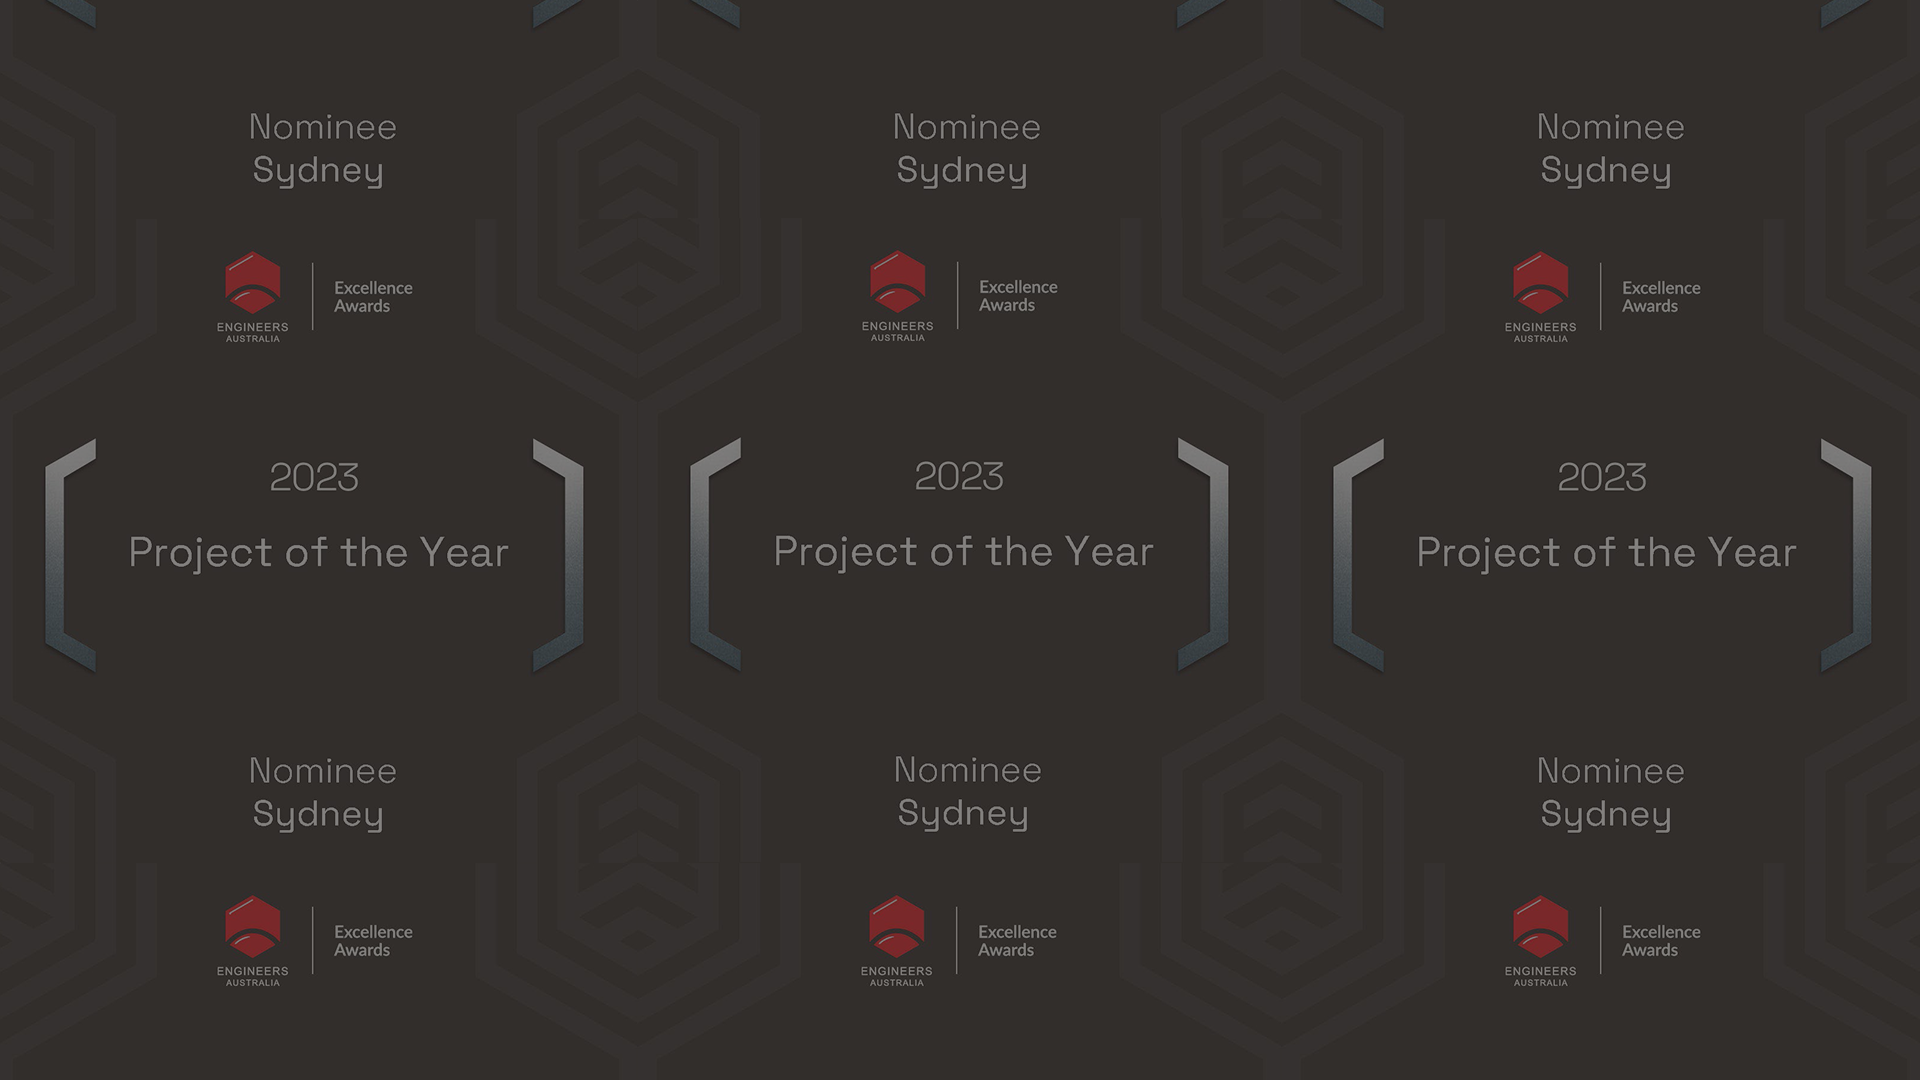  ENGINEERS AUSTRALIA  PROJECT OF THE YEAR 2023 NOMINEE   [LEARN MORE] 